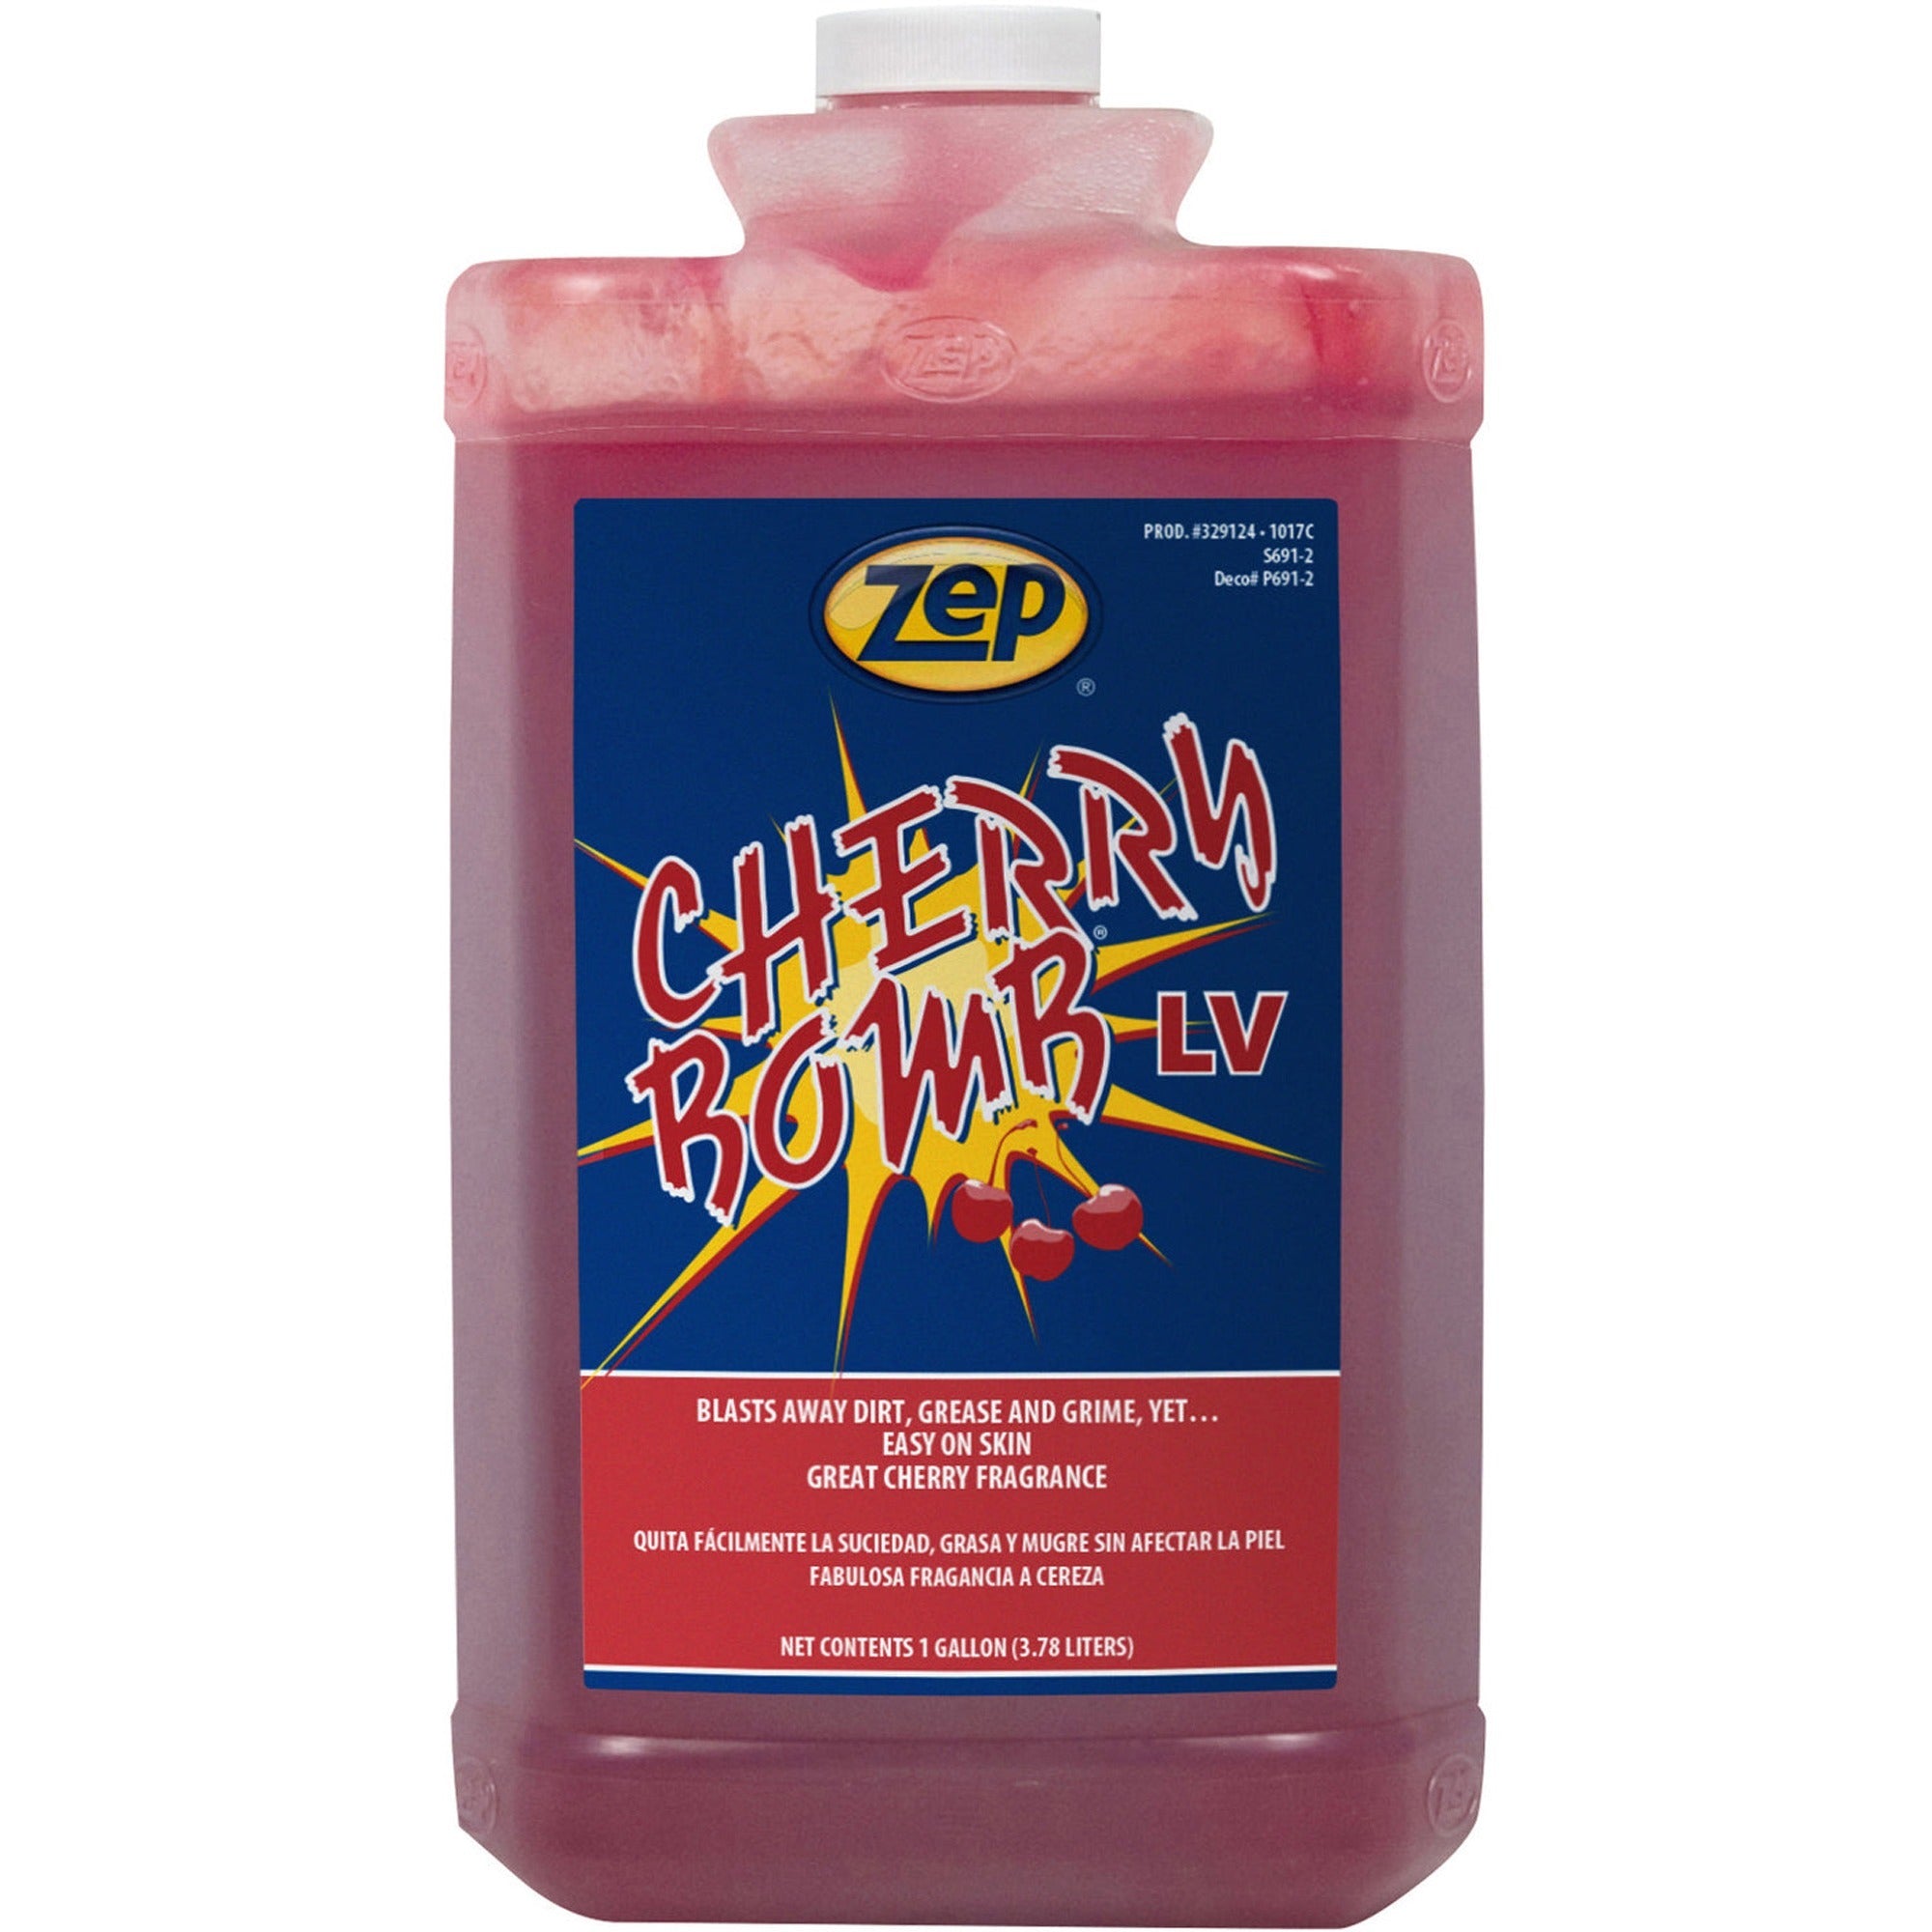 Zep Cherry Bomb LV Industrial Hand Cleaner - Cherry ScentFor - 1 gal (3.8 L) - Dirt Remover, Grime Remover, Soil Remover, Ink Remover, Resin Remover, Paint Remover, Adhesive Remover, Tar Remover, Asphalt Remover, Odor Remover, Grease Remover - Hand, - 1